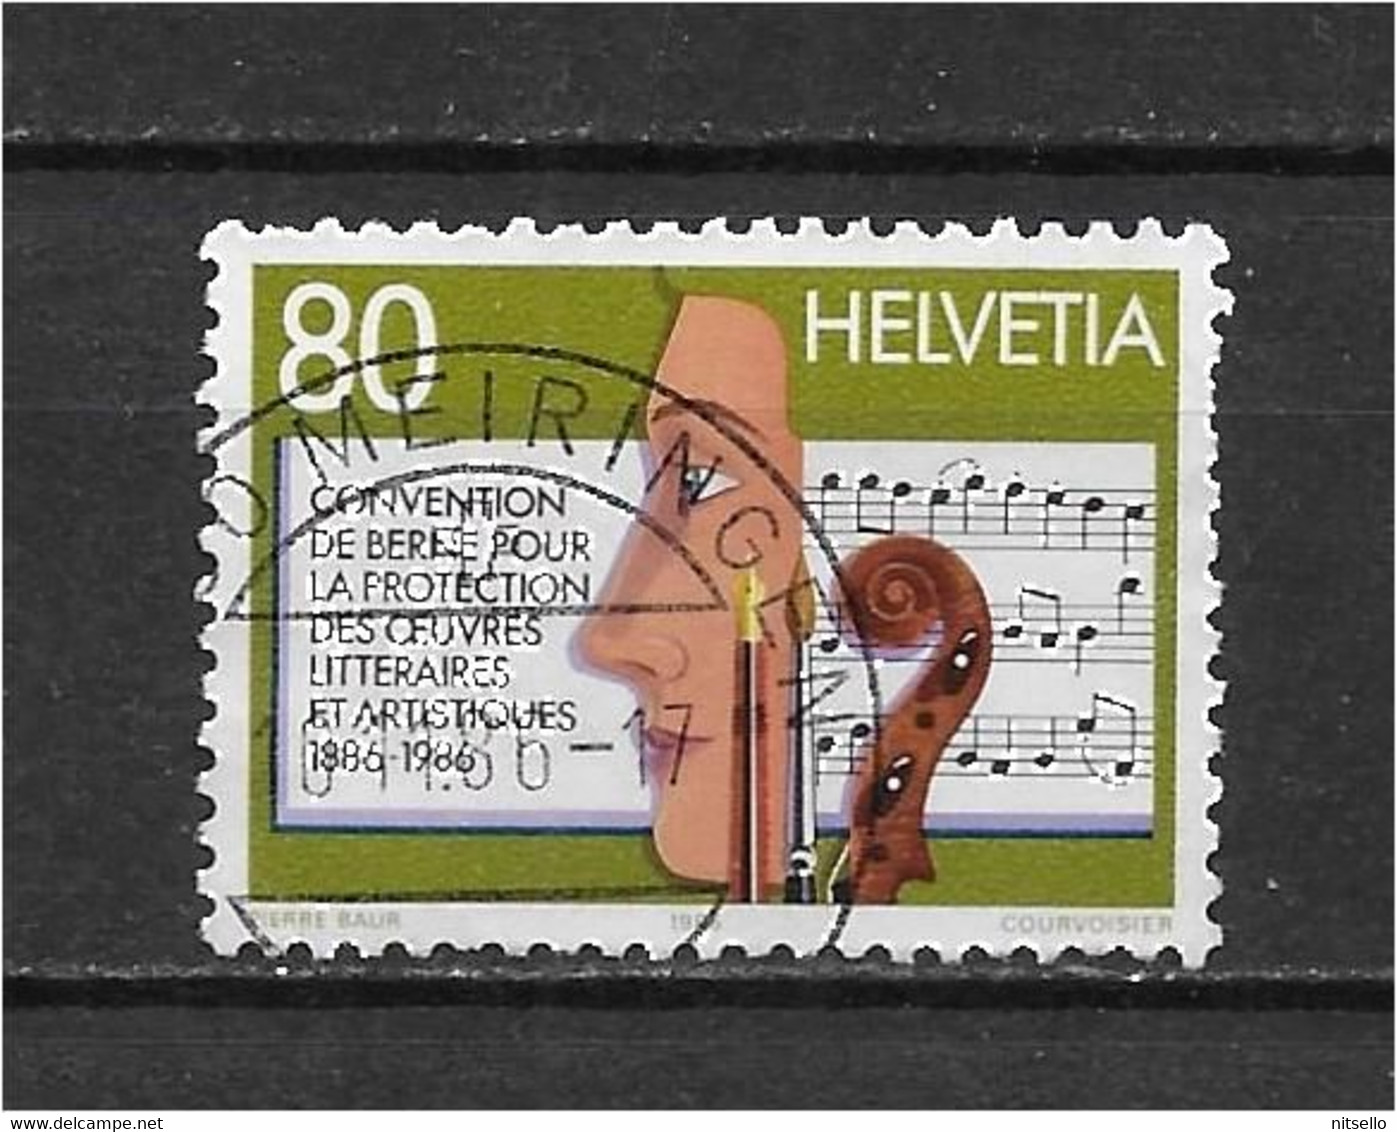 LOTE 1530A  ///  SUIZA   YVERT Nº: 1258   ¡¡¡ OFERTA - LIQUIDATION - JE LIQUIDE !!! - Used Stamps